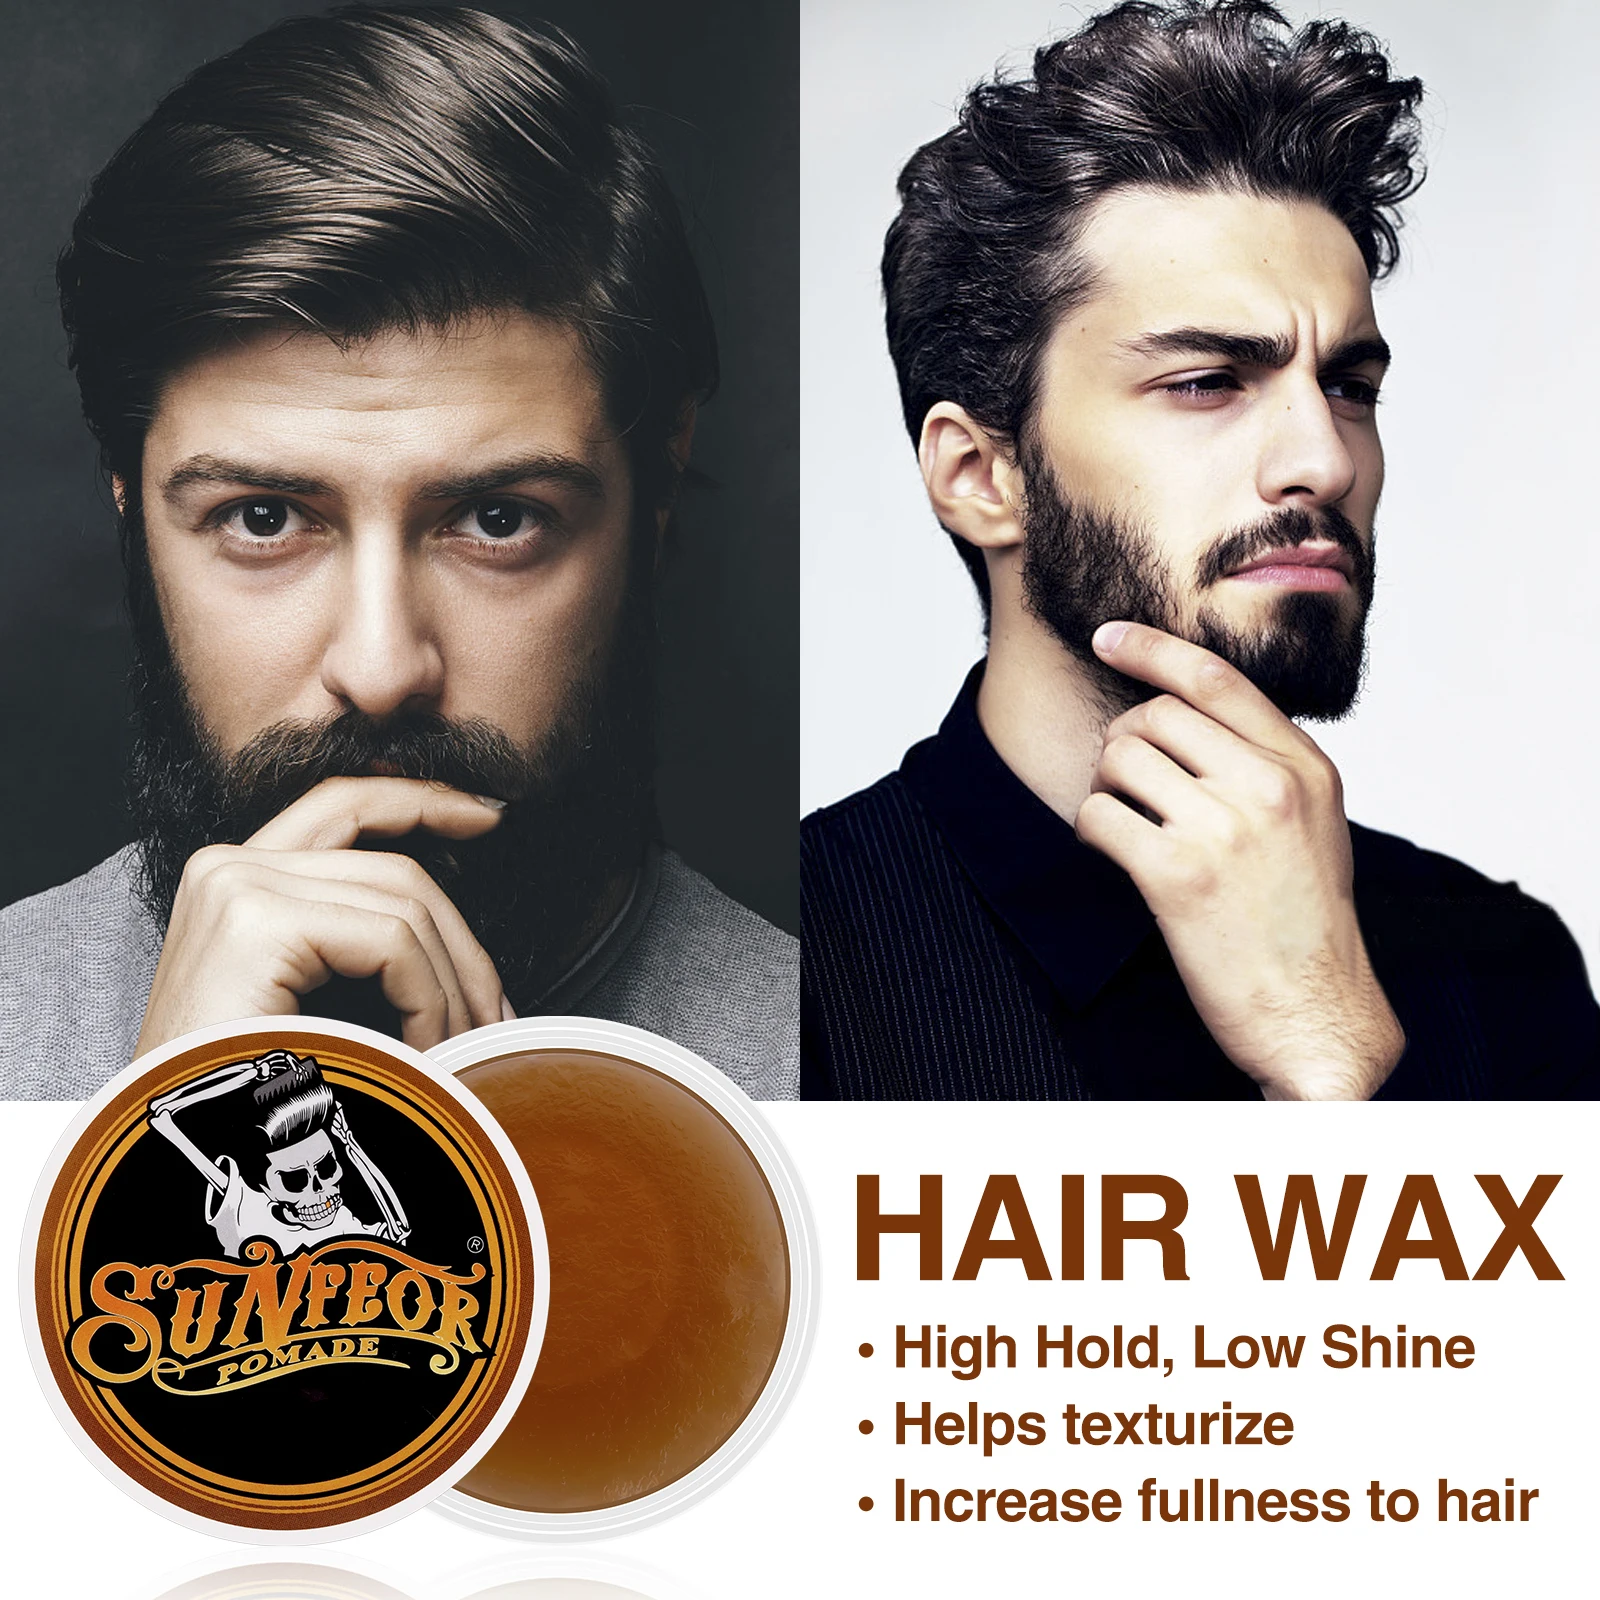 50 Classy Professional Hairstyles For Men (Business Hairstyles) - Hairmanz